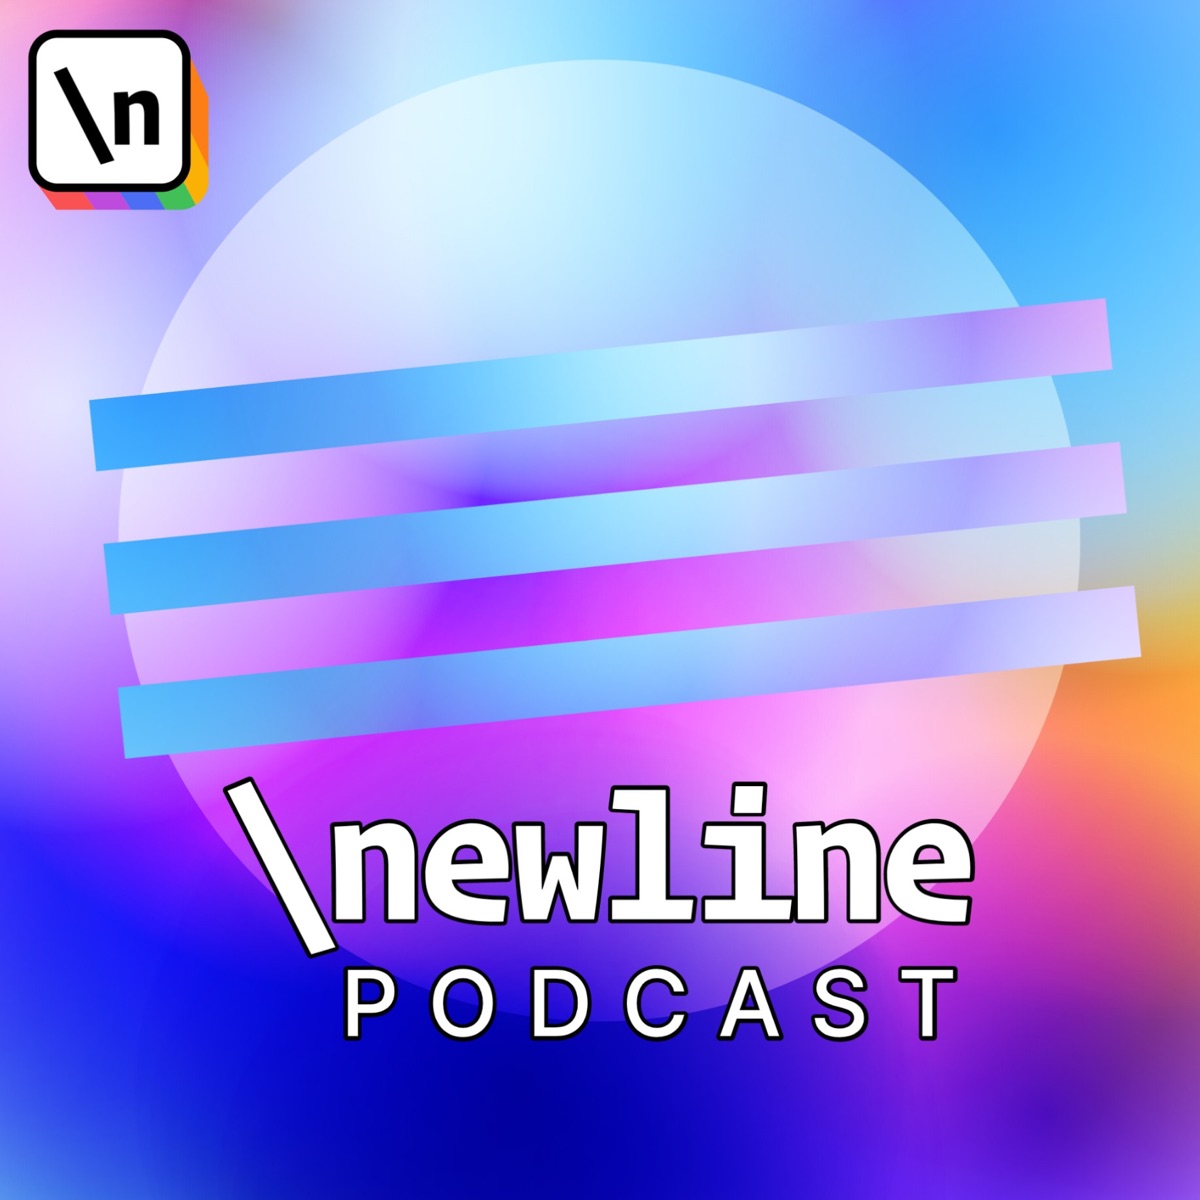 Newline Podcast Podtail - wiki ability to view what other classes a class inherits from developer hub roblox developer forum